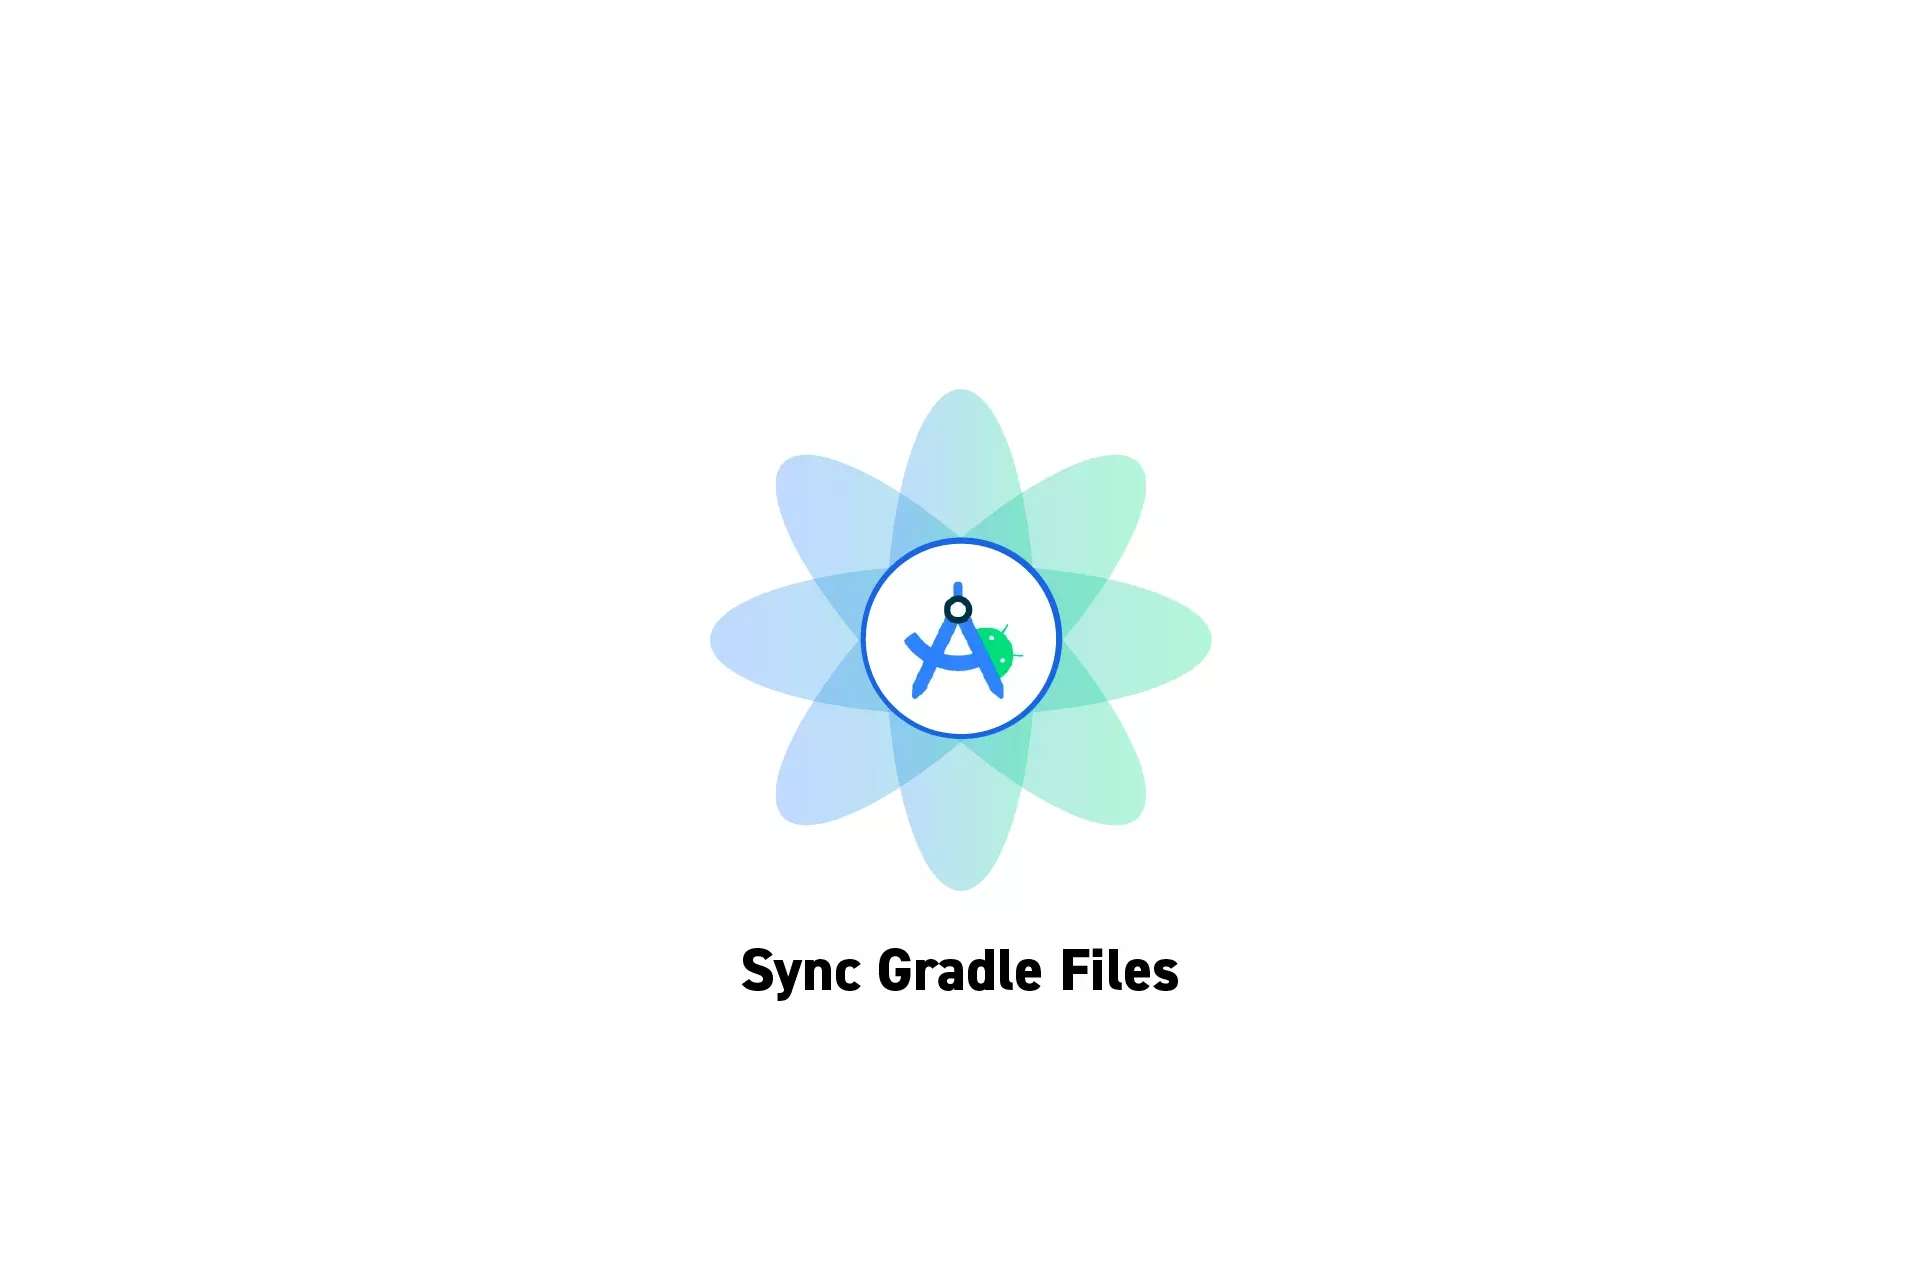 A flower that represents Android Studio with the text “Sync Gradle Files” beneath it.